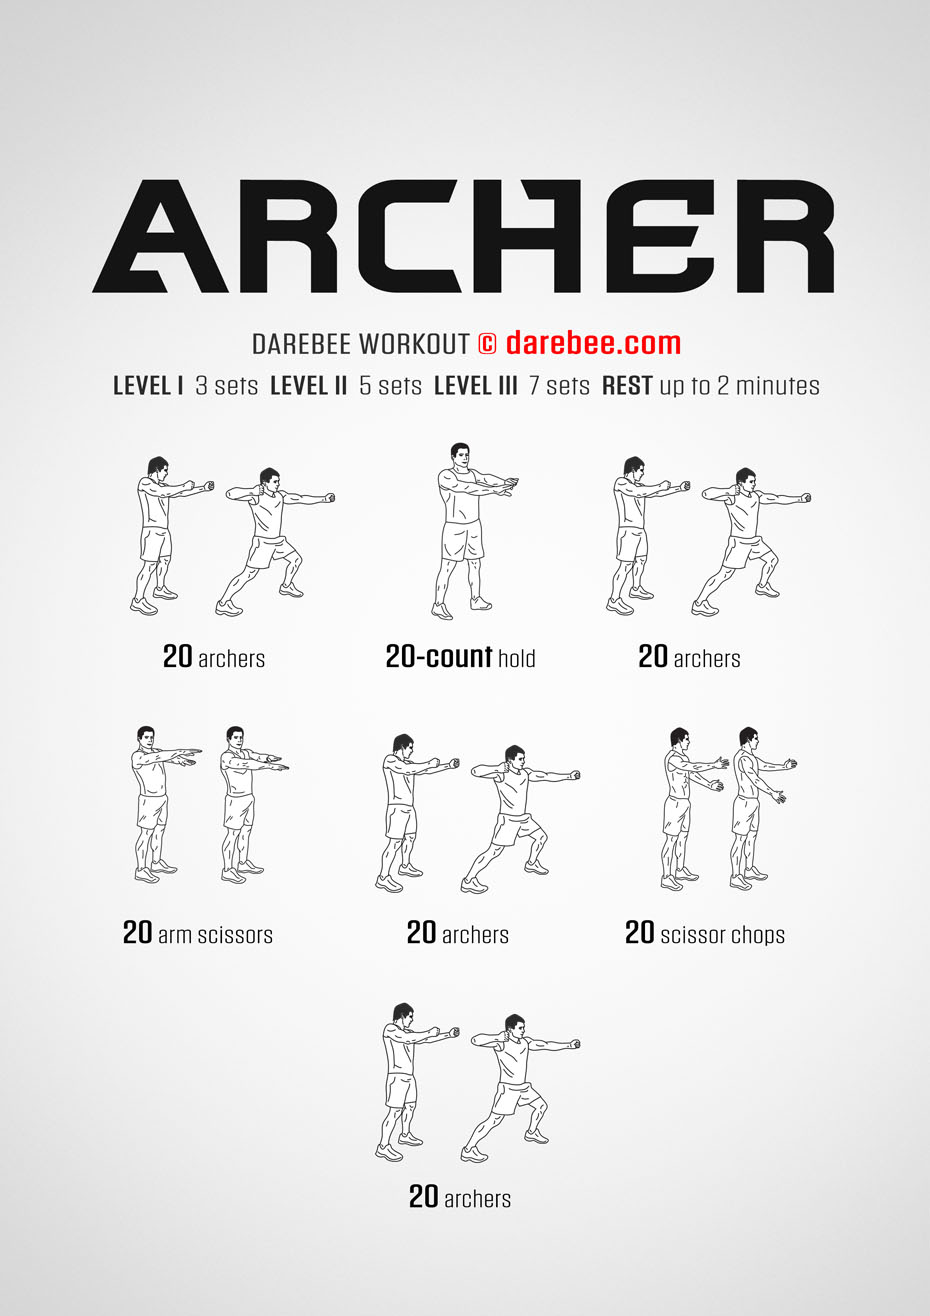 The Archer workout is a Darebee no-equipment, upper body workout that helps you improve upper body mobility, dexterity, strength and muscle tone.